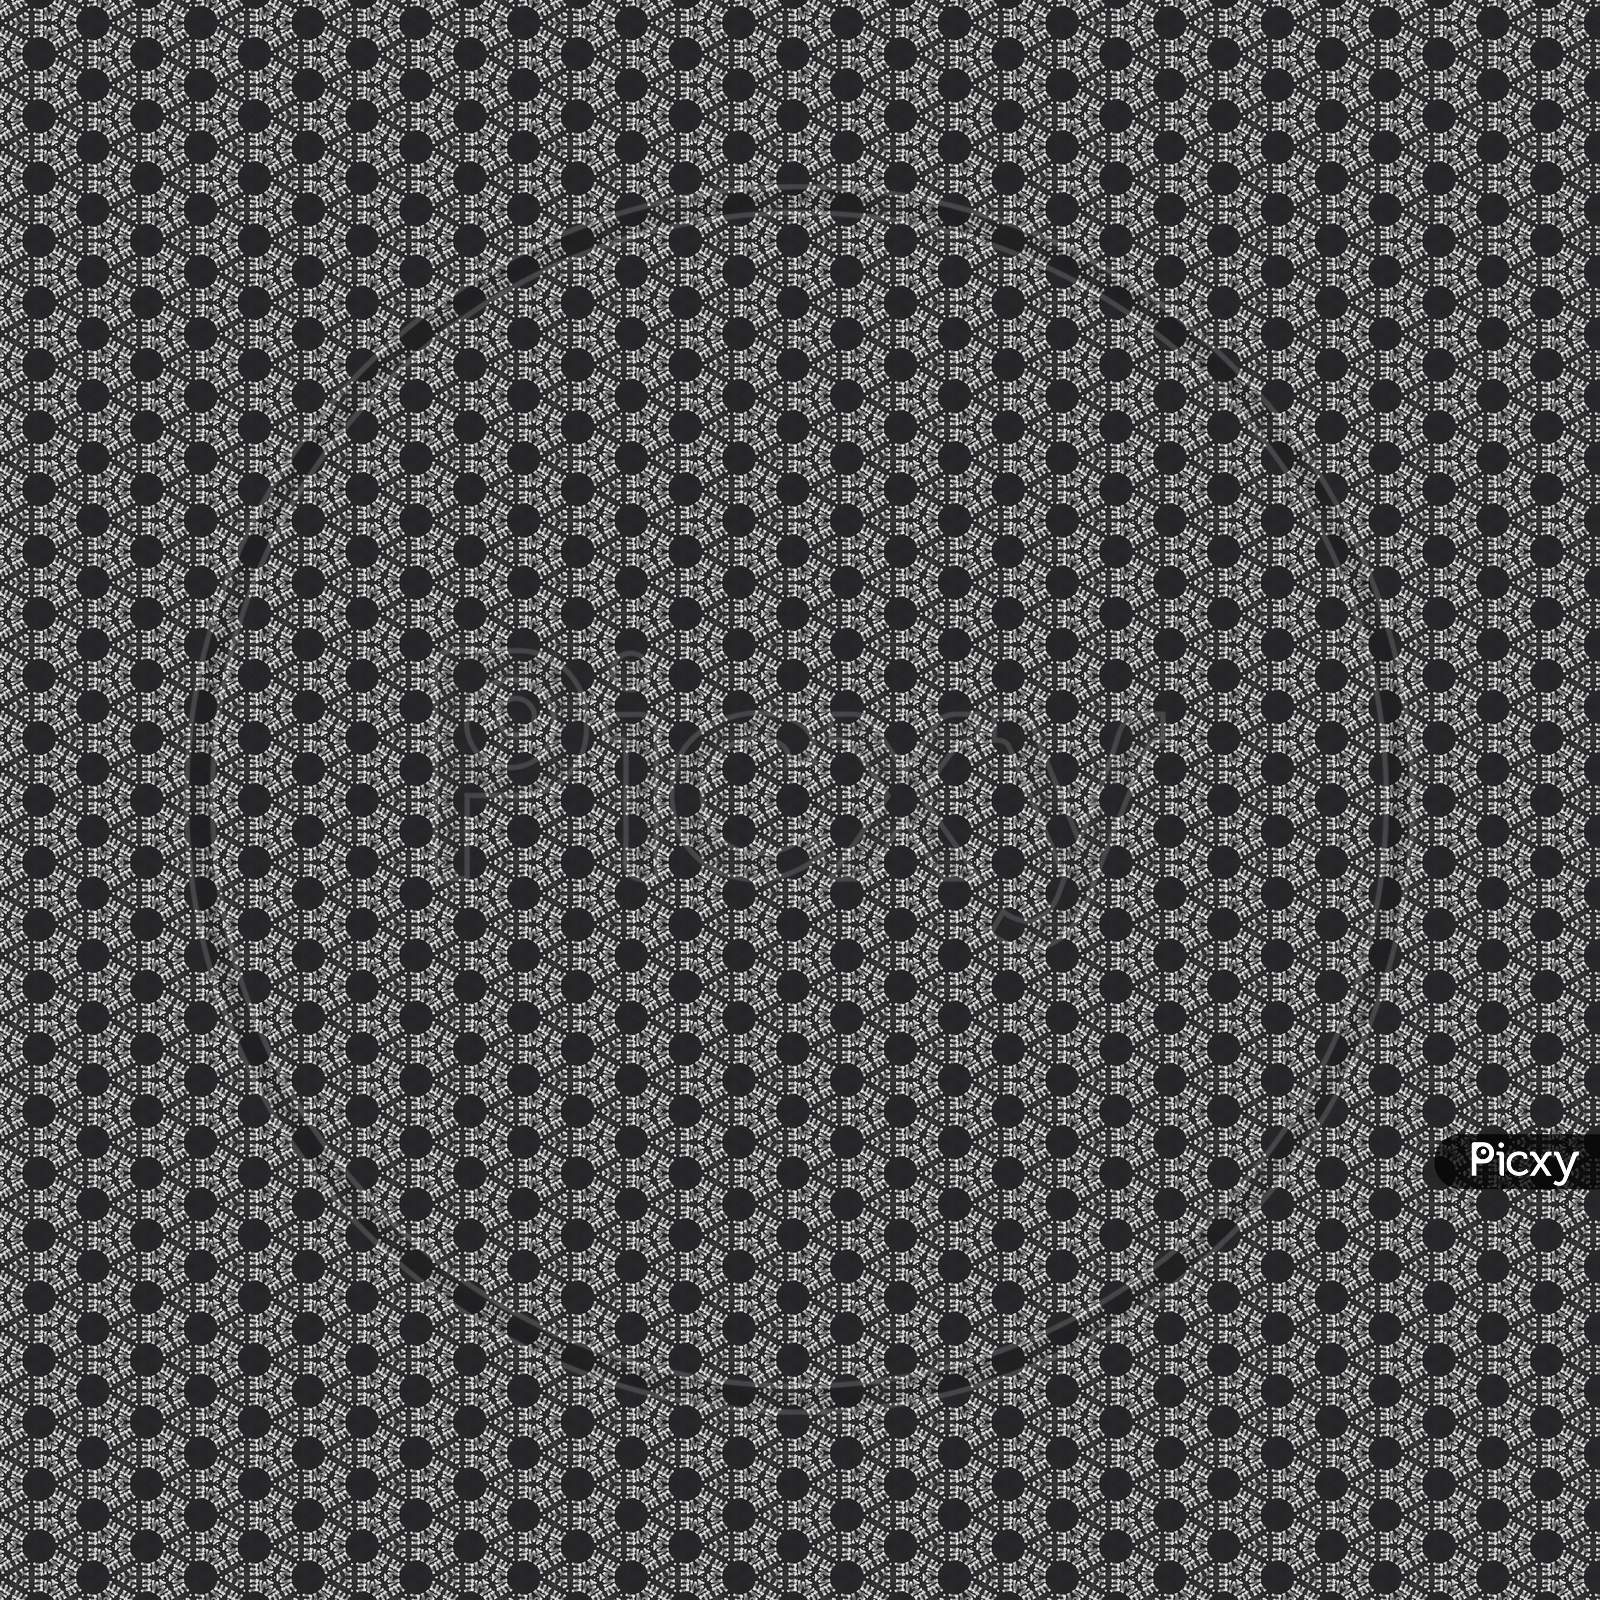 Elegant And Ornamental Dark Grey Symmetrical Designs On Solid Sheet Of Wallpaper. Concept Of Home Decor And Interior Designing